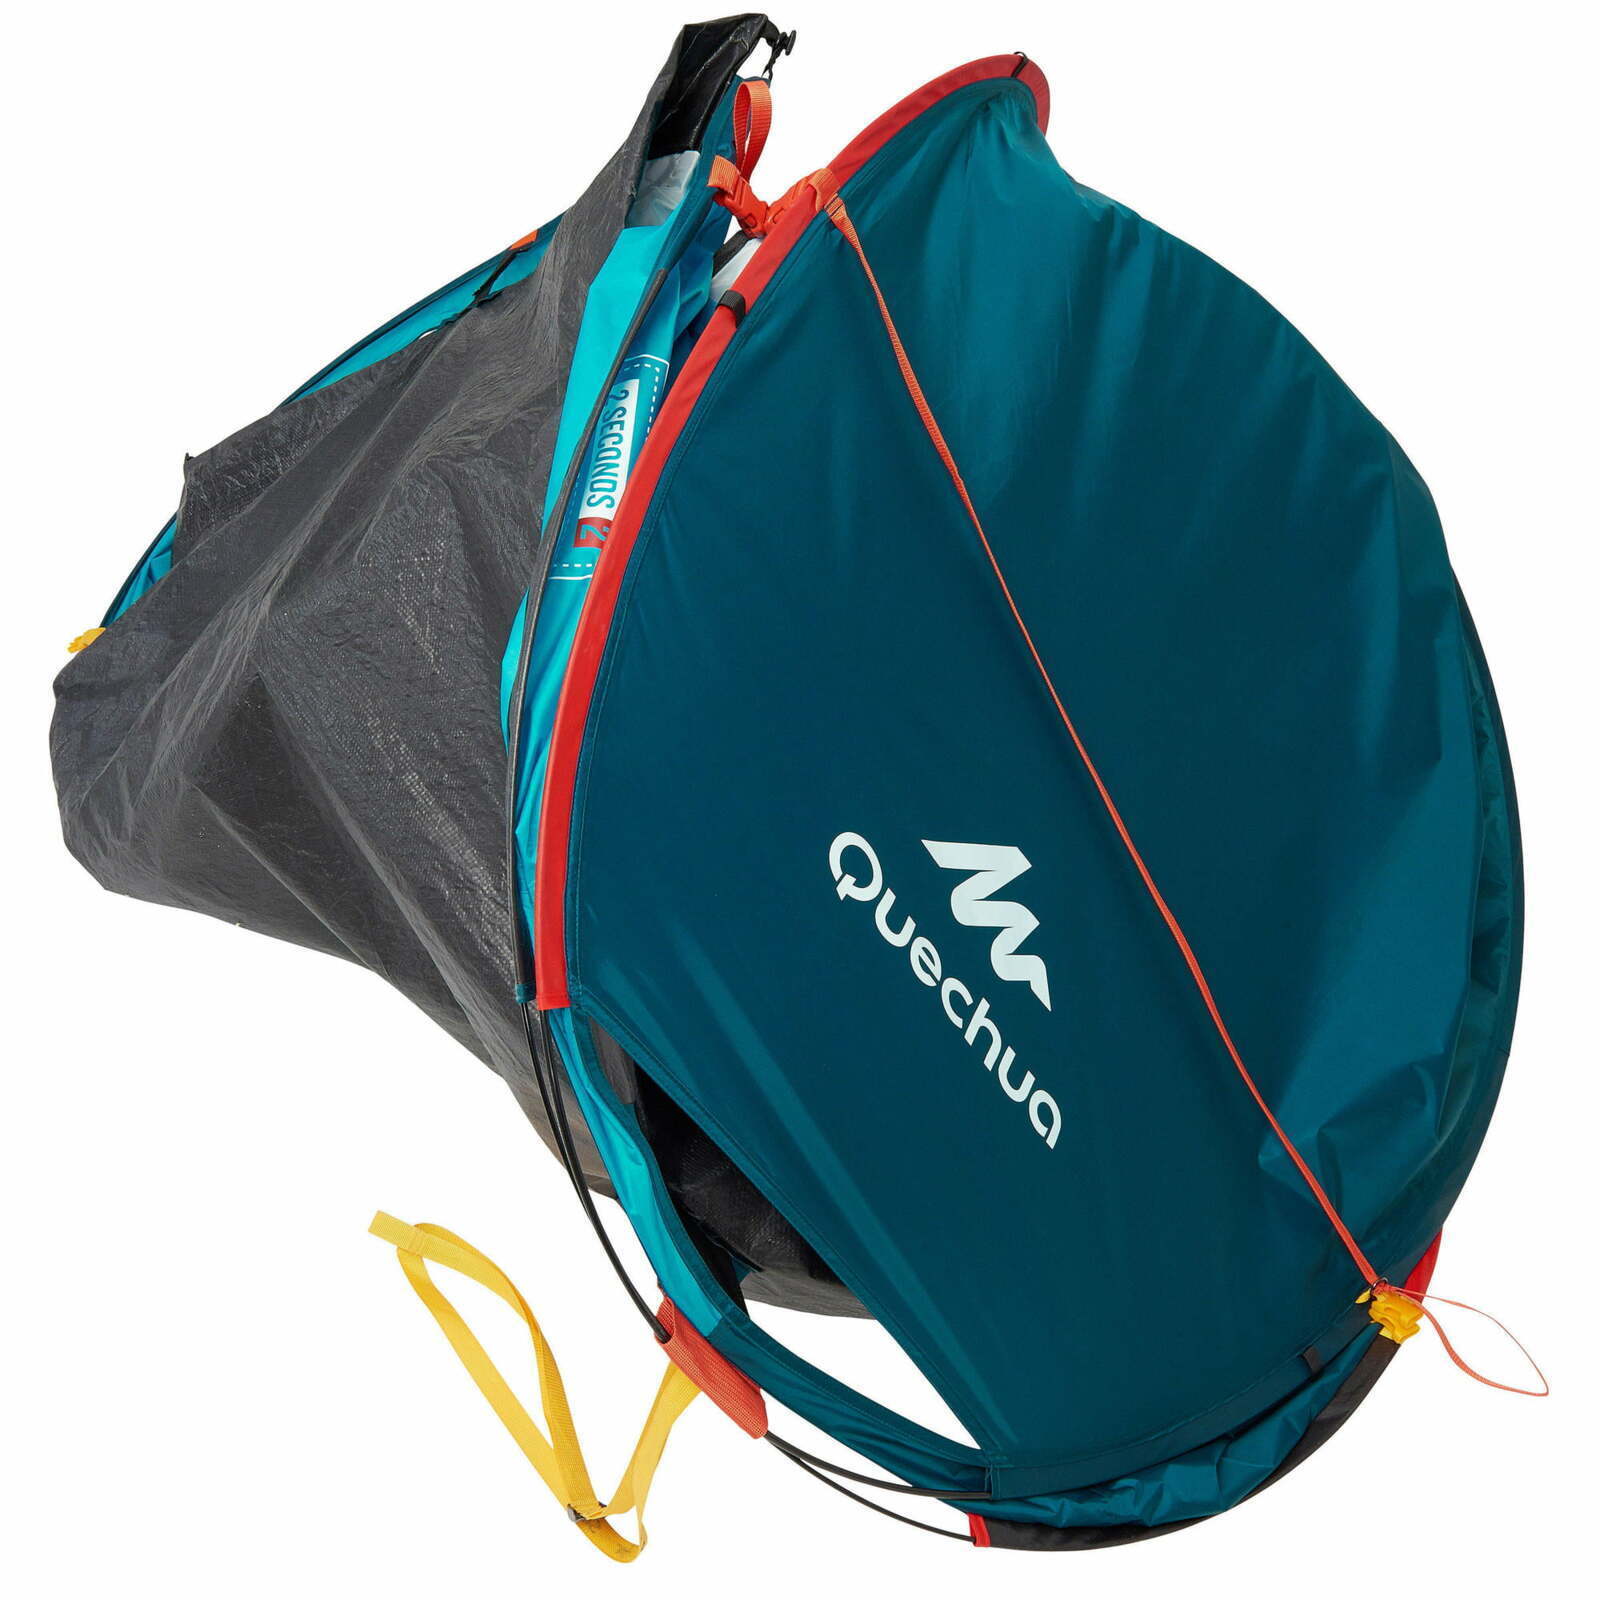 Sleeping Bag Dealers Quechua in Agra - Dealers, Manufacturers & Suppliers  -Justdial